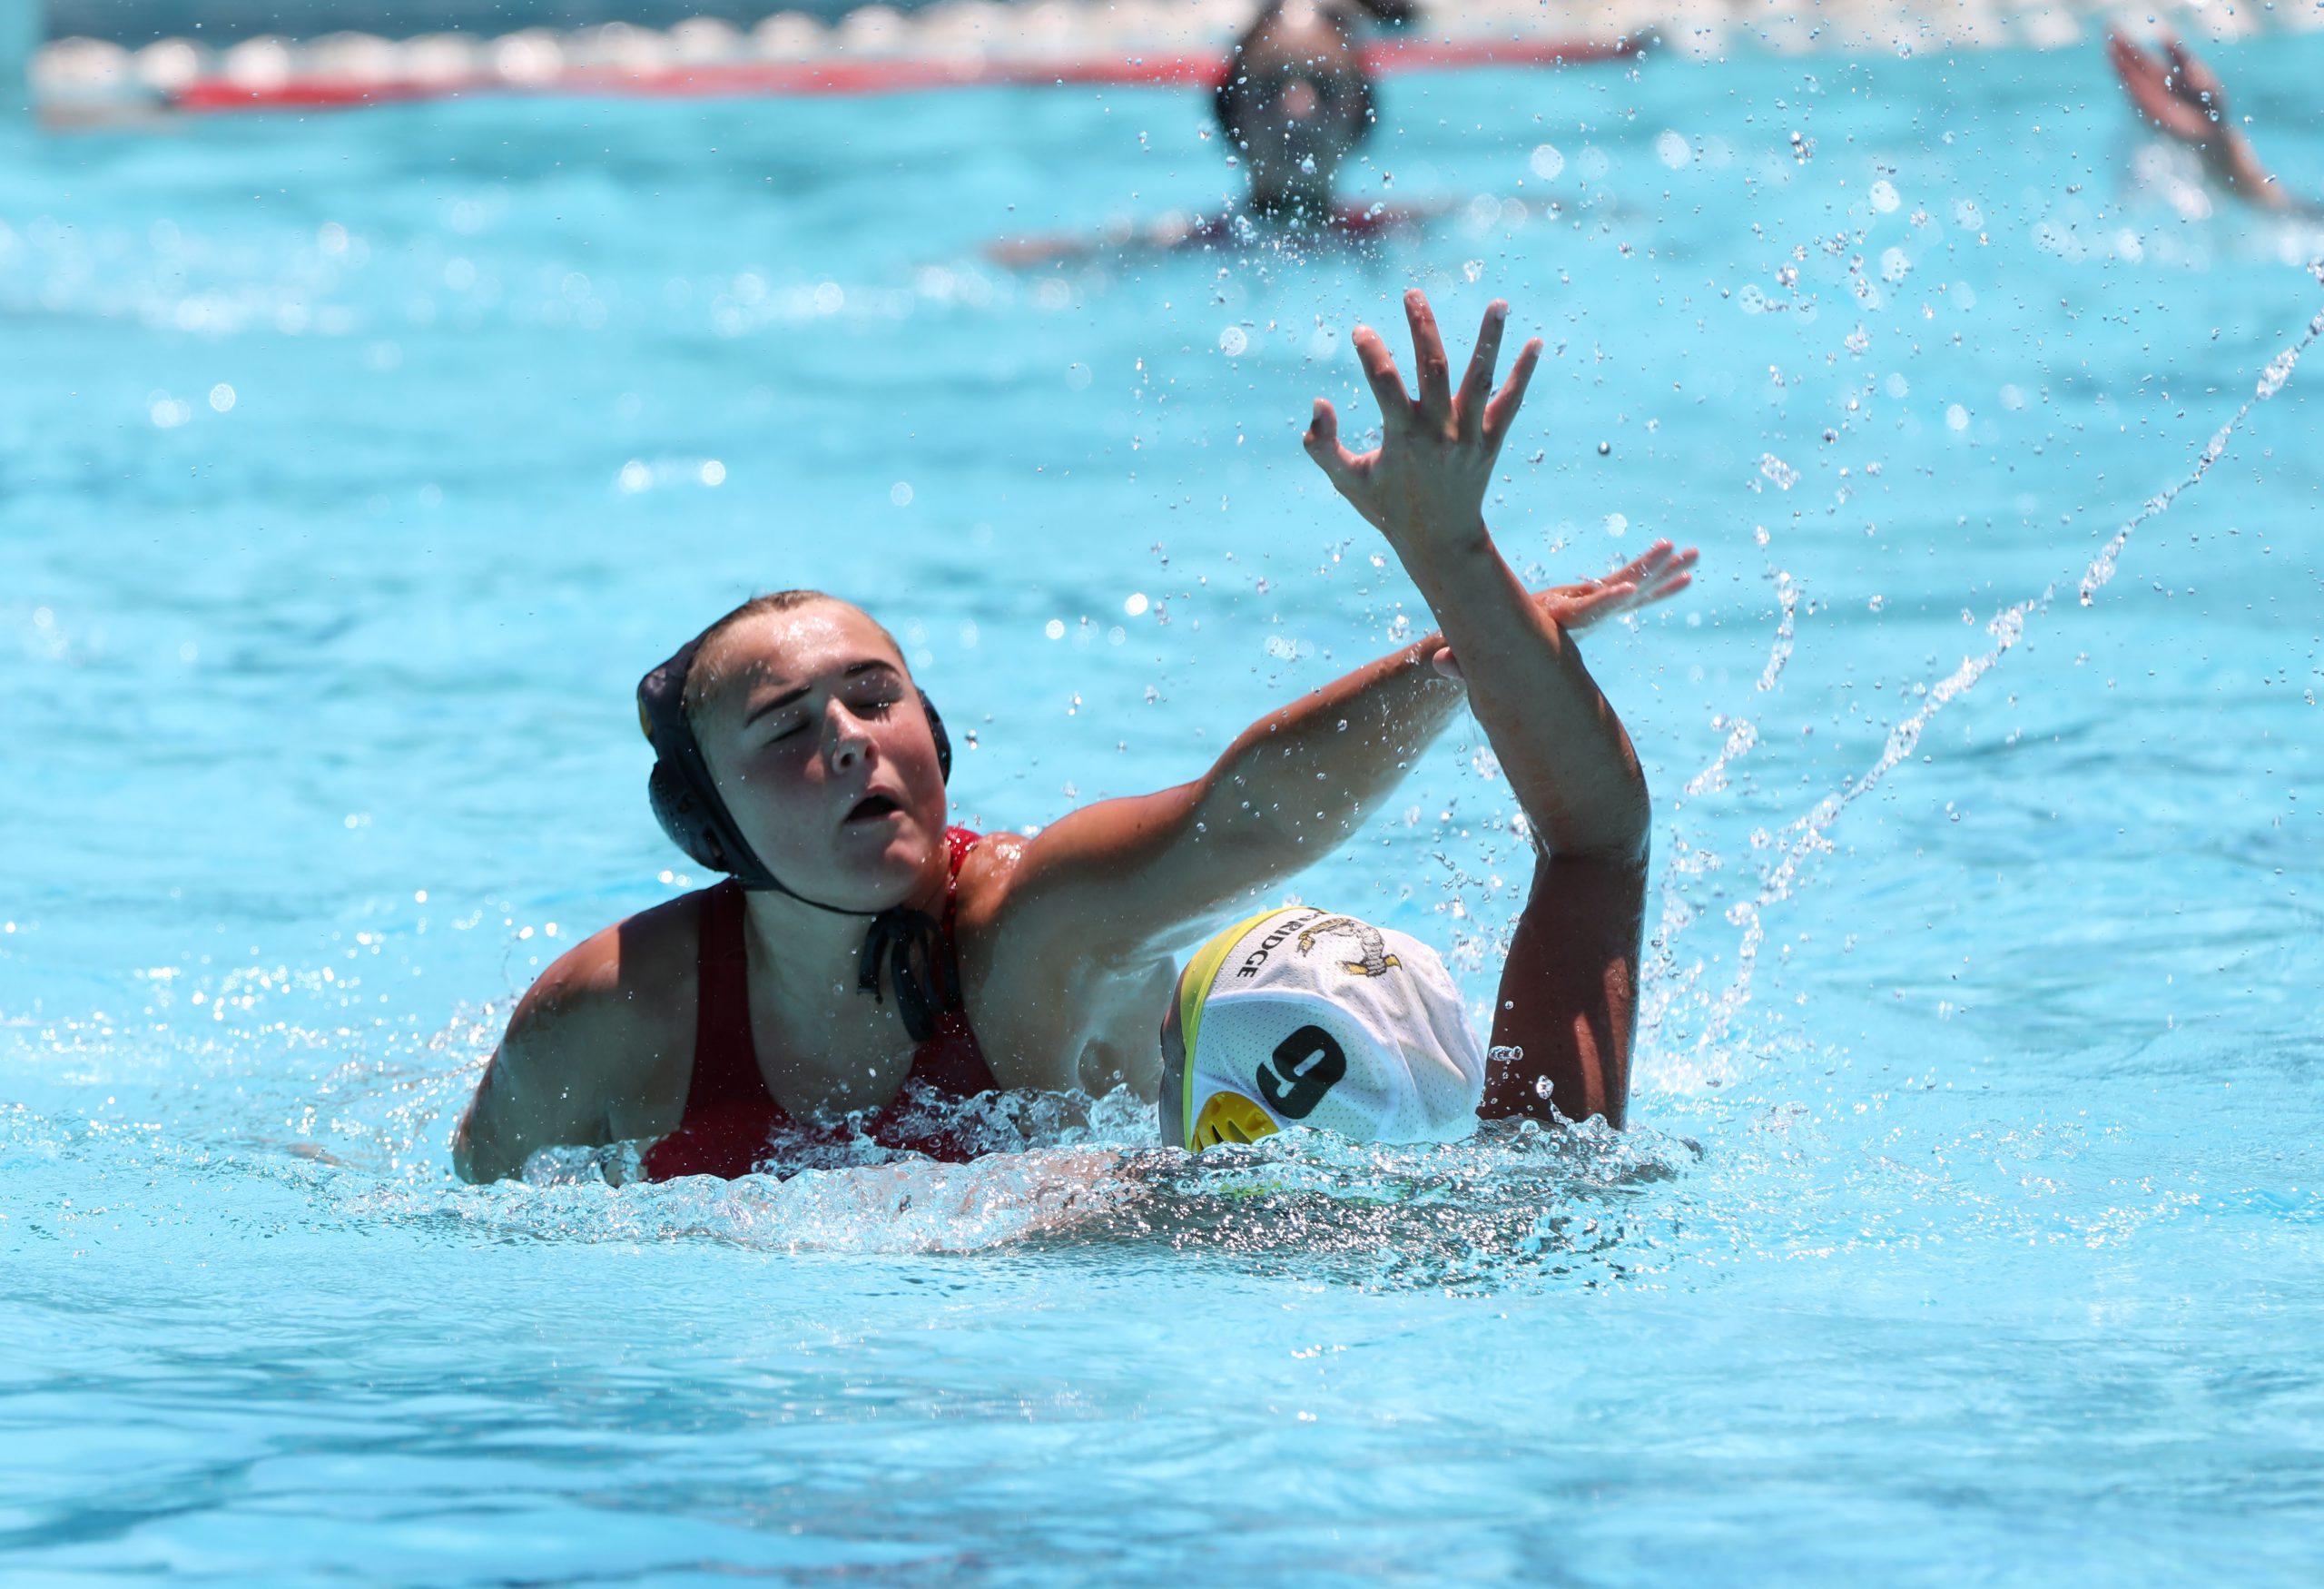 KIngswood College 1st Team Water Polo player Lucy Nagel gets the ball away from a Woodridge player. Kingswood won 18-2 in the opening game in the Brian Baker tournament held at Kingswood College. Photo: Jackie Clausen